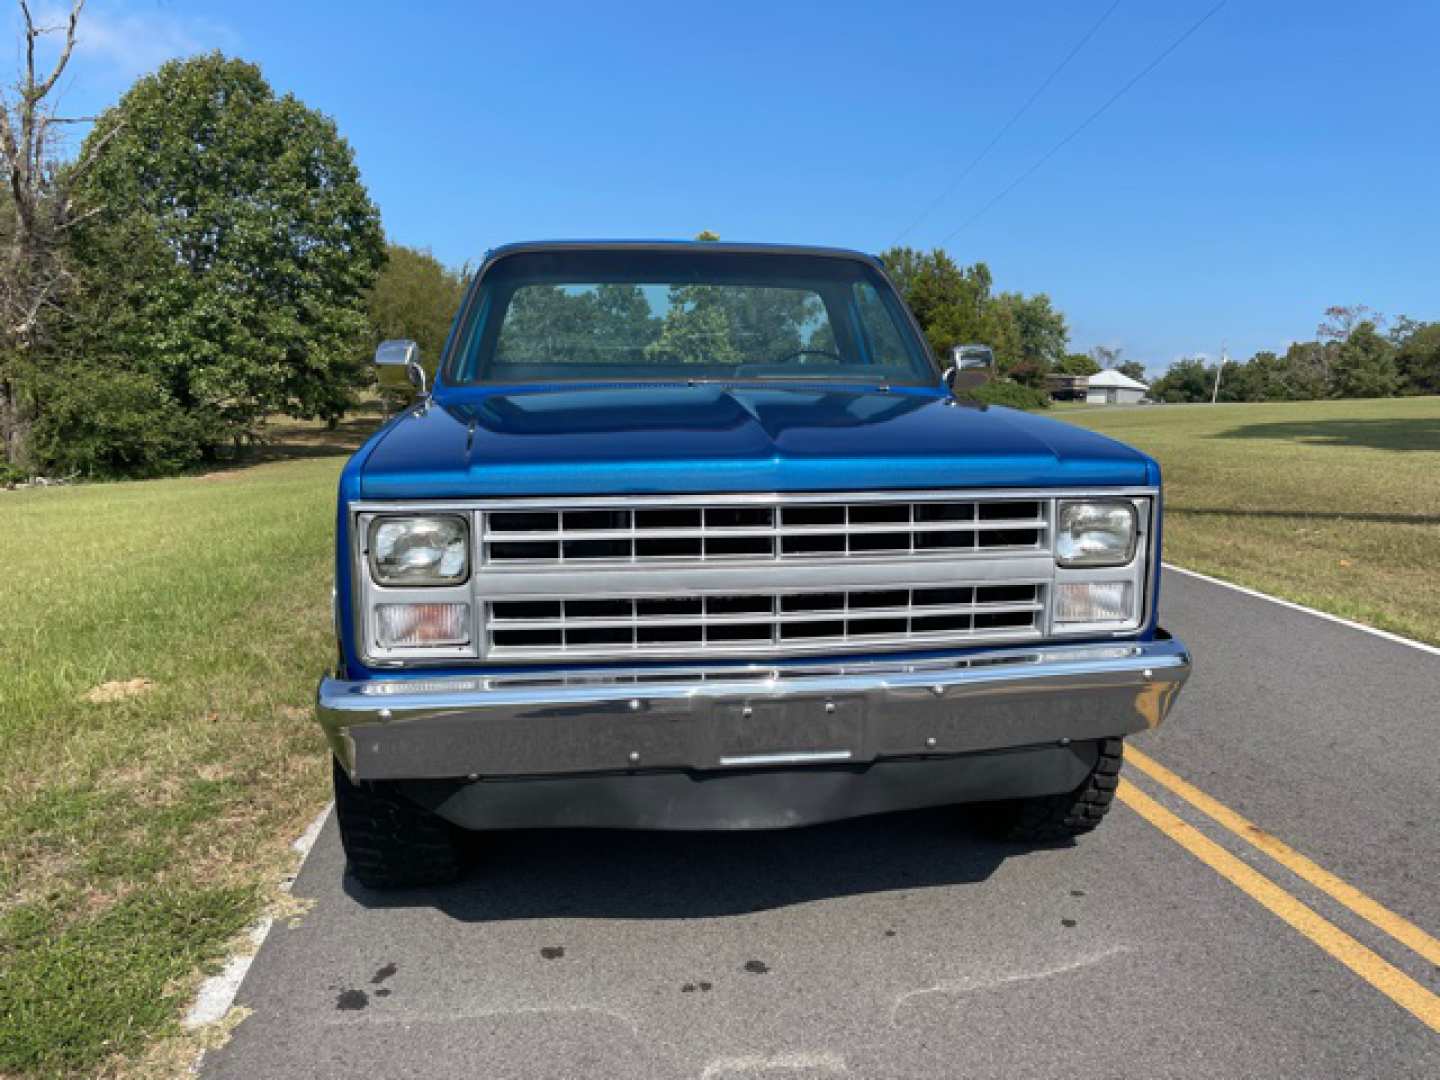 4th Image of a 1986 CHEVROLET K10